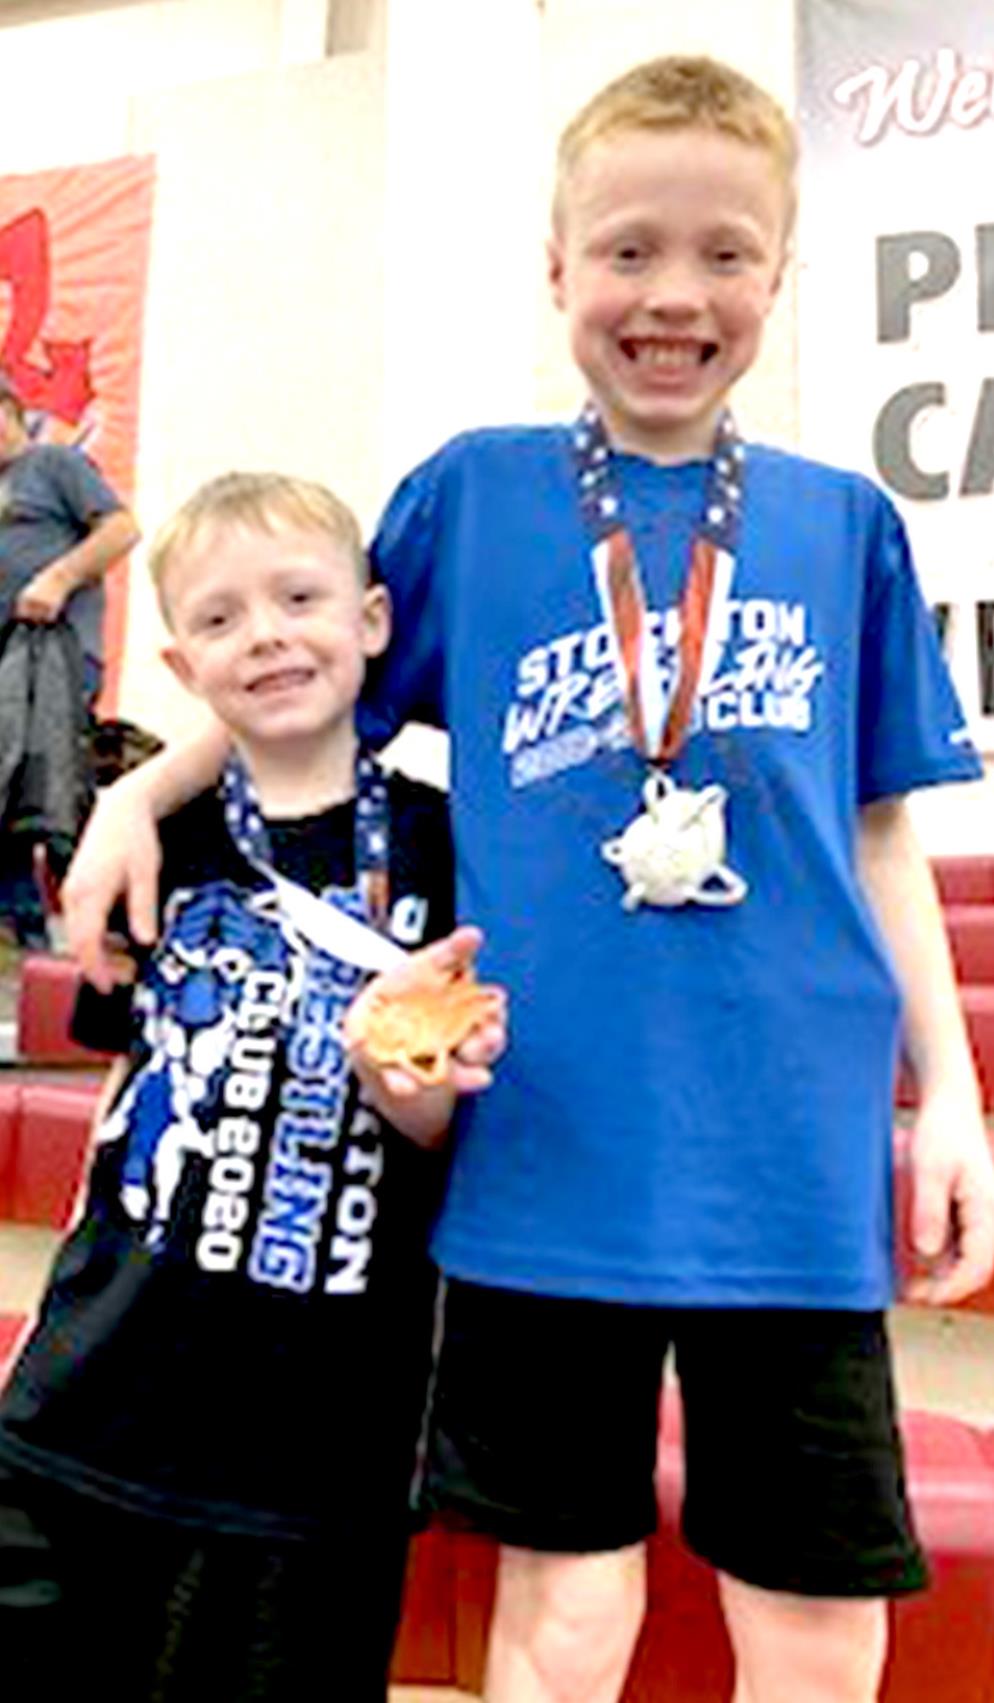 BROTHERS BLAKE AND ZEKE BALTHAZOR recently competed in the Plainville Open/Novice Wrestling Tournament Saturday, February 8th, at Plainville. Blake (left) placed 4th in the 6 &amp; Under 43A-lb. division, while Zeke (right) placed 2nd in the 10 &amp; Under 64-67-lb. division.